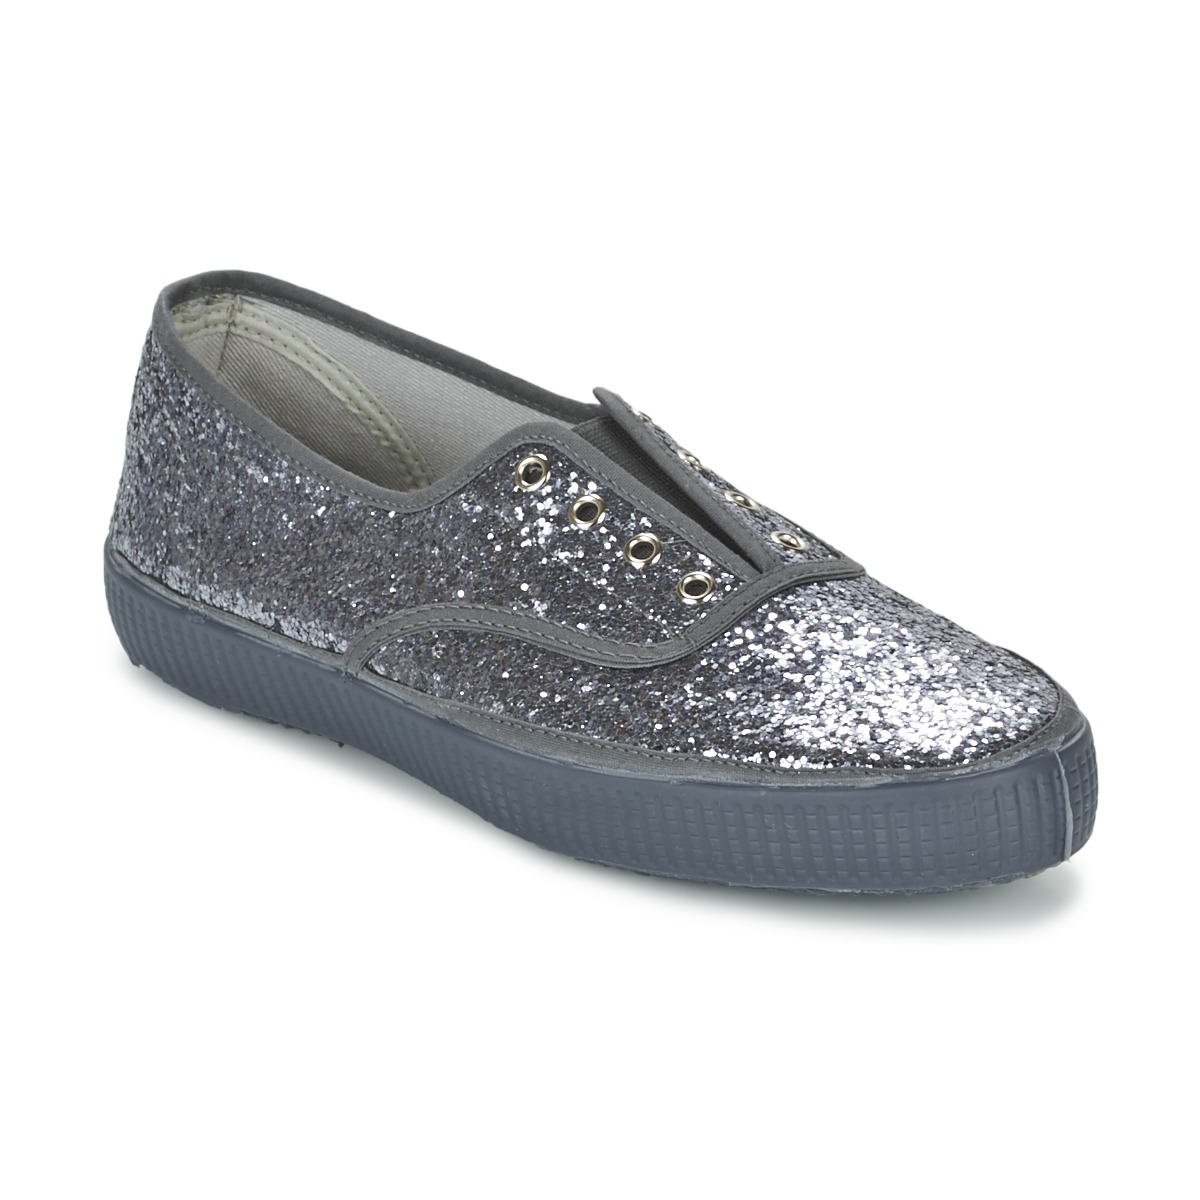 Shoes Women Low top trainers Chipie JOSS GLITTER Anthracite